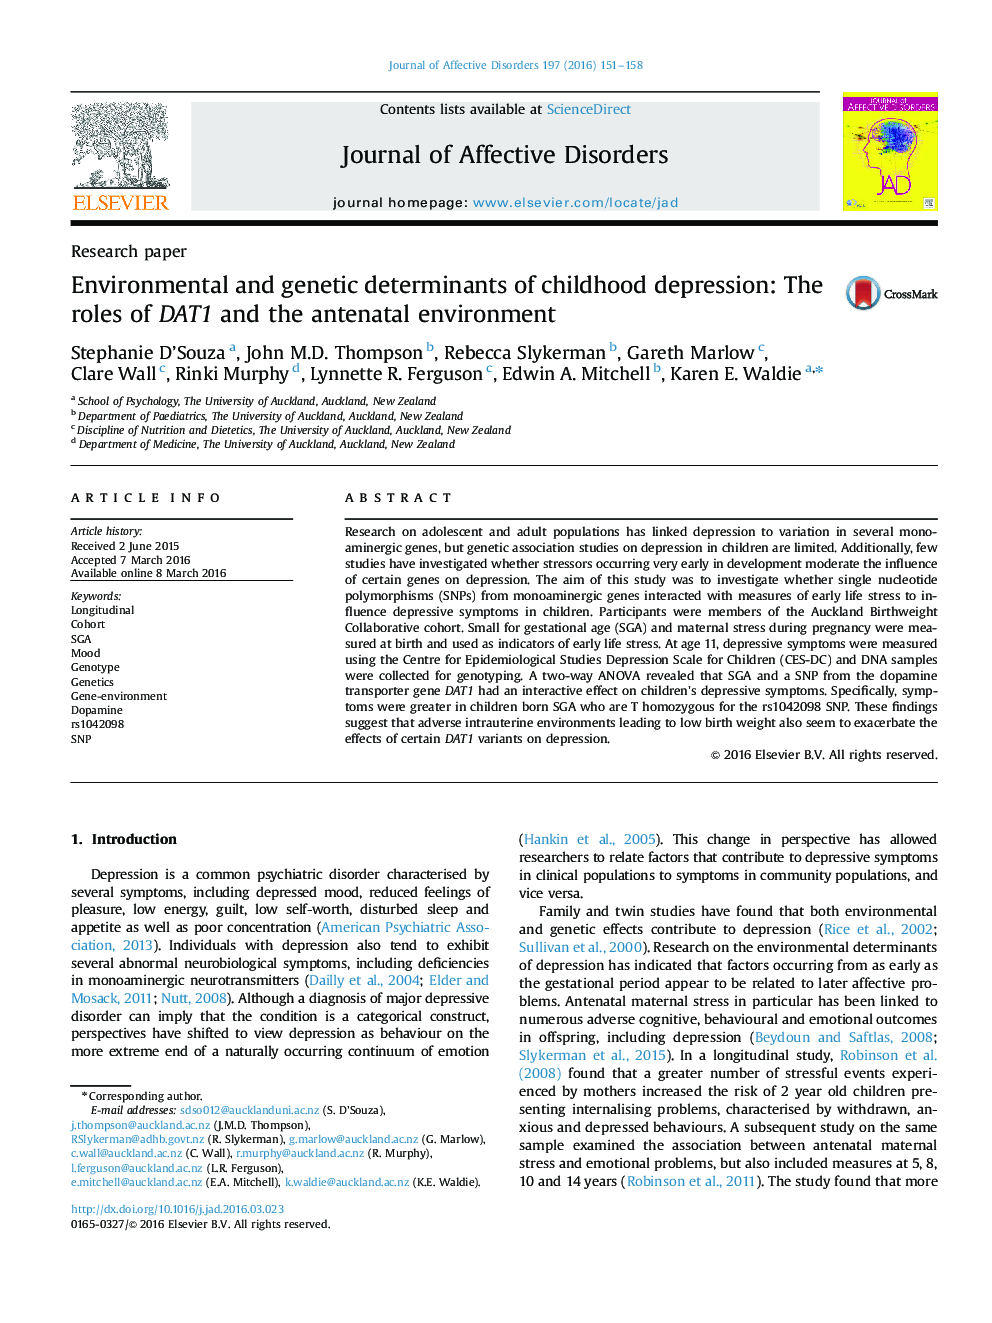 Environmental and genetic determinants of childhood depression: The roles of DAT1 and the antenatal environment